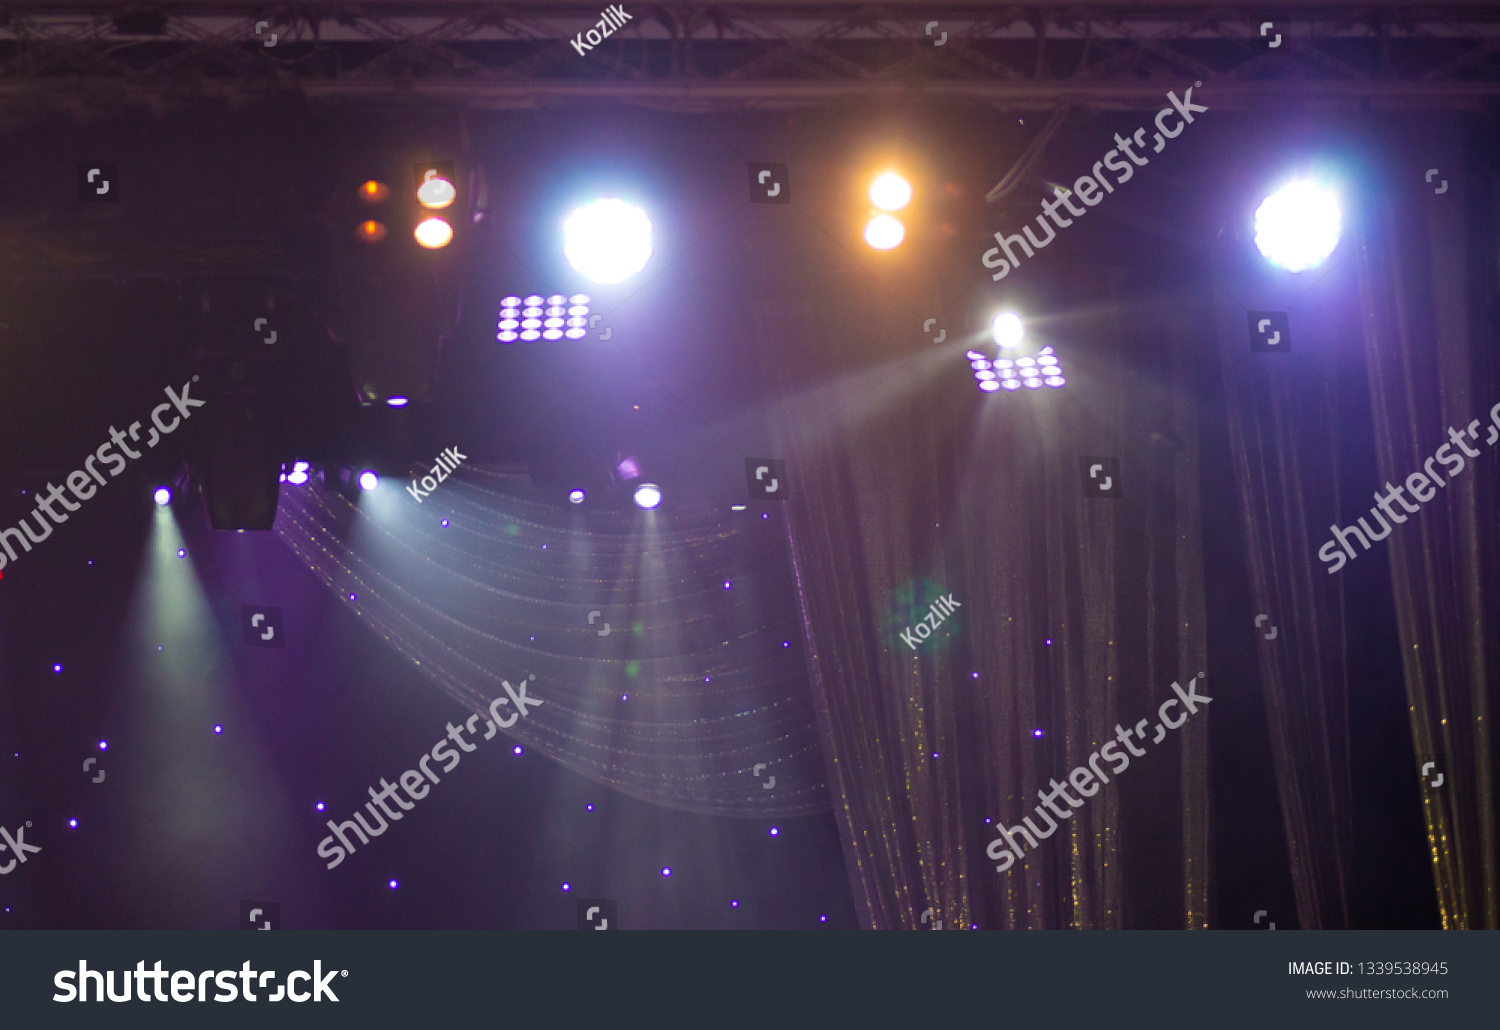 Theatrical scene without actors, scenic light and smoke #1339538945